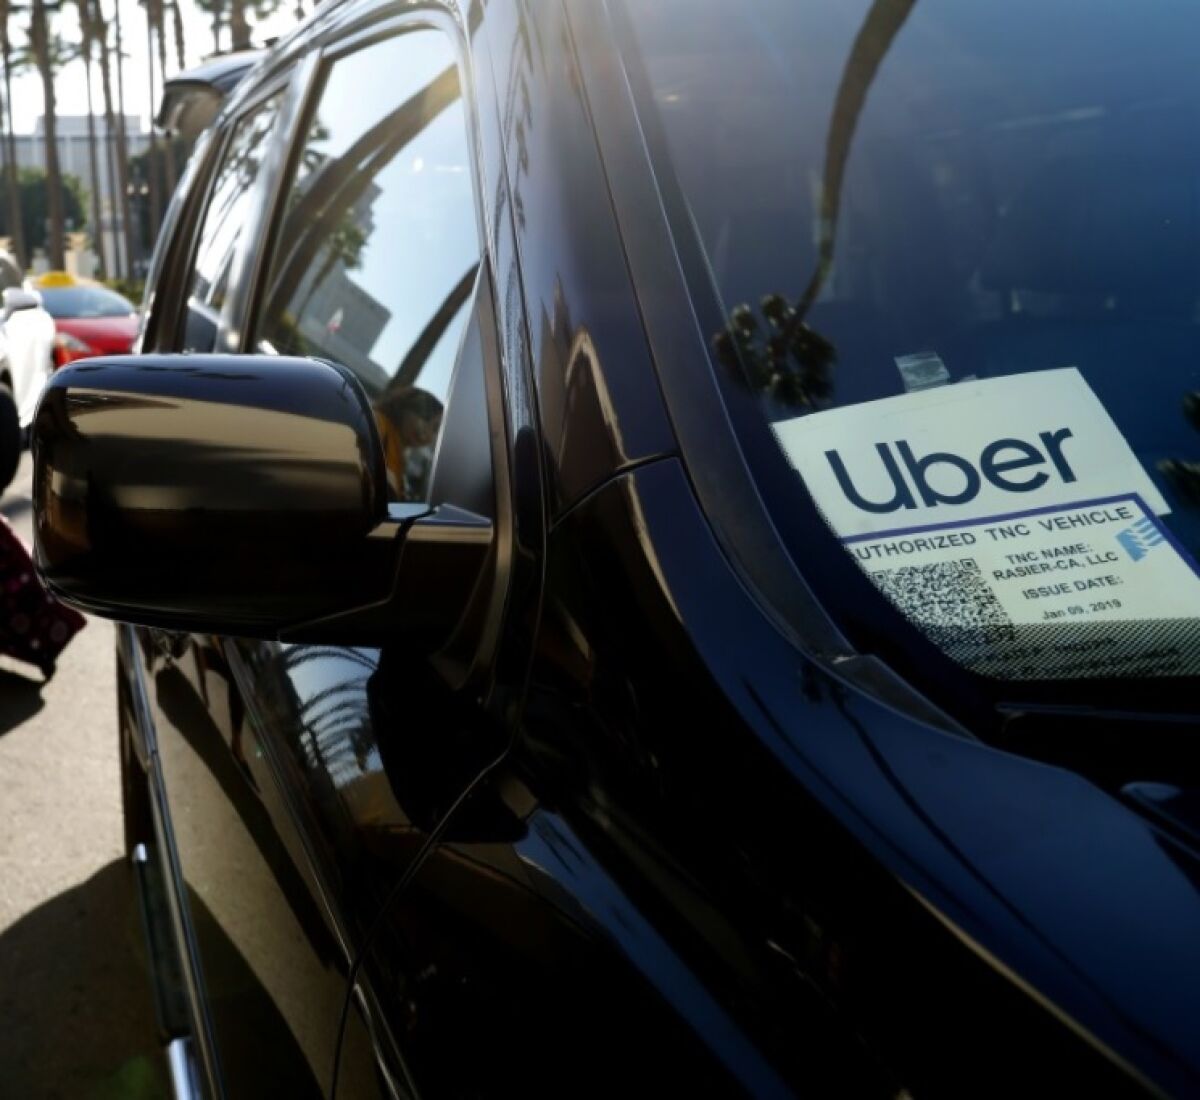 levend kopen Legende Opinion: Want to be a better Uber or Lyft driver? Follow these 7 rules. -  The San Diego Union-Tribune